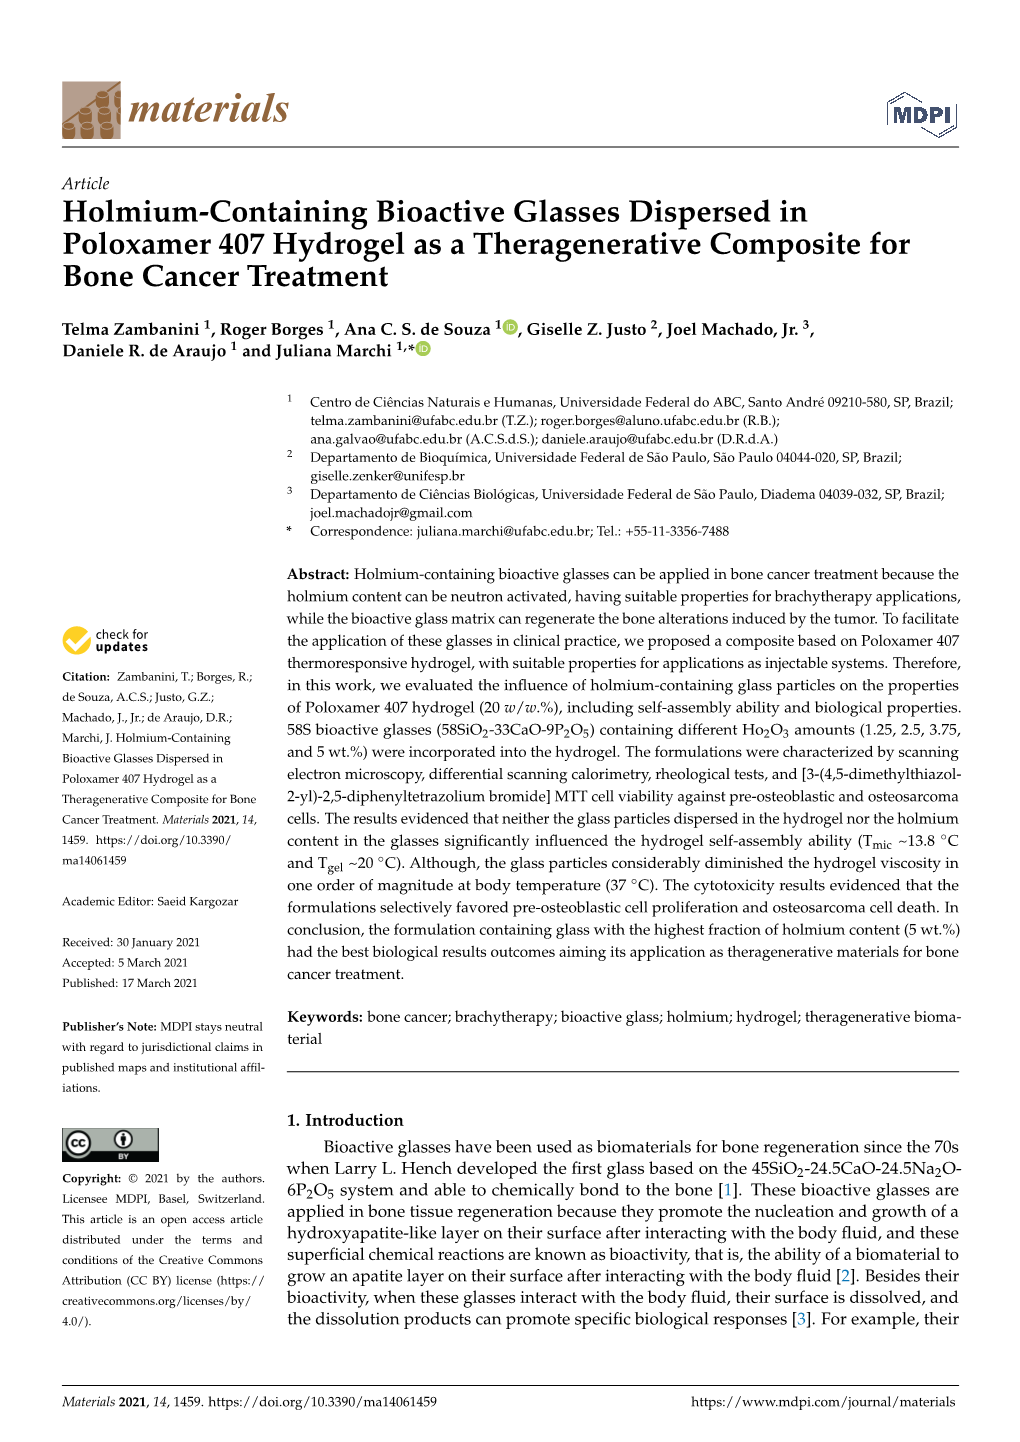 Holmium-Containing Bioactive Glasses Dispersed in Poloxamer 407 Hydrogel As a Theragenerative Composite for Bone Cancer Treatment